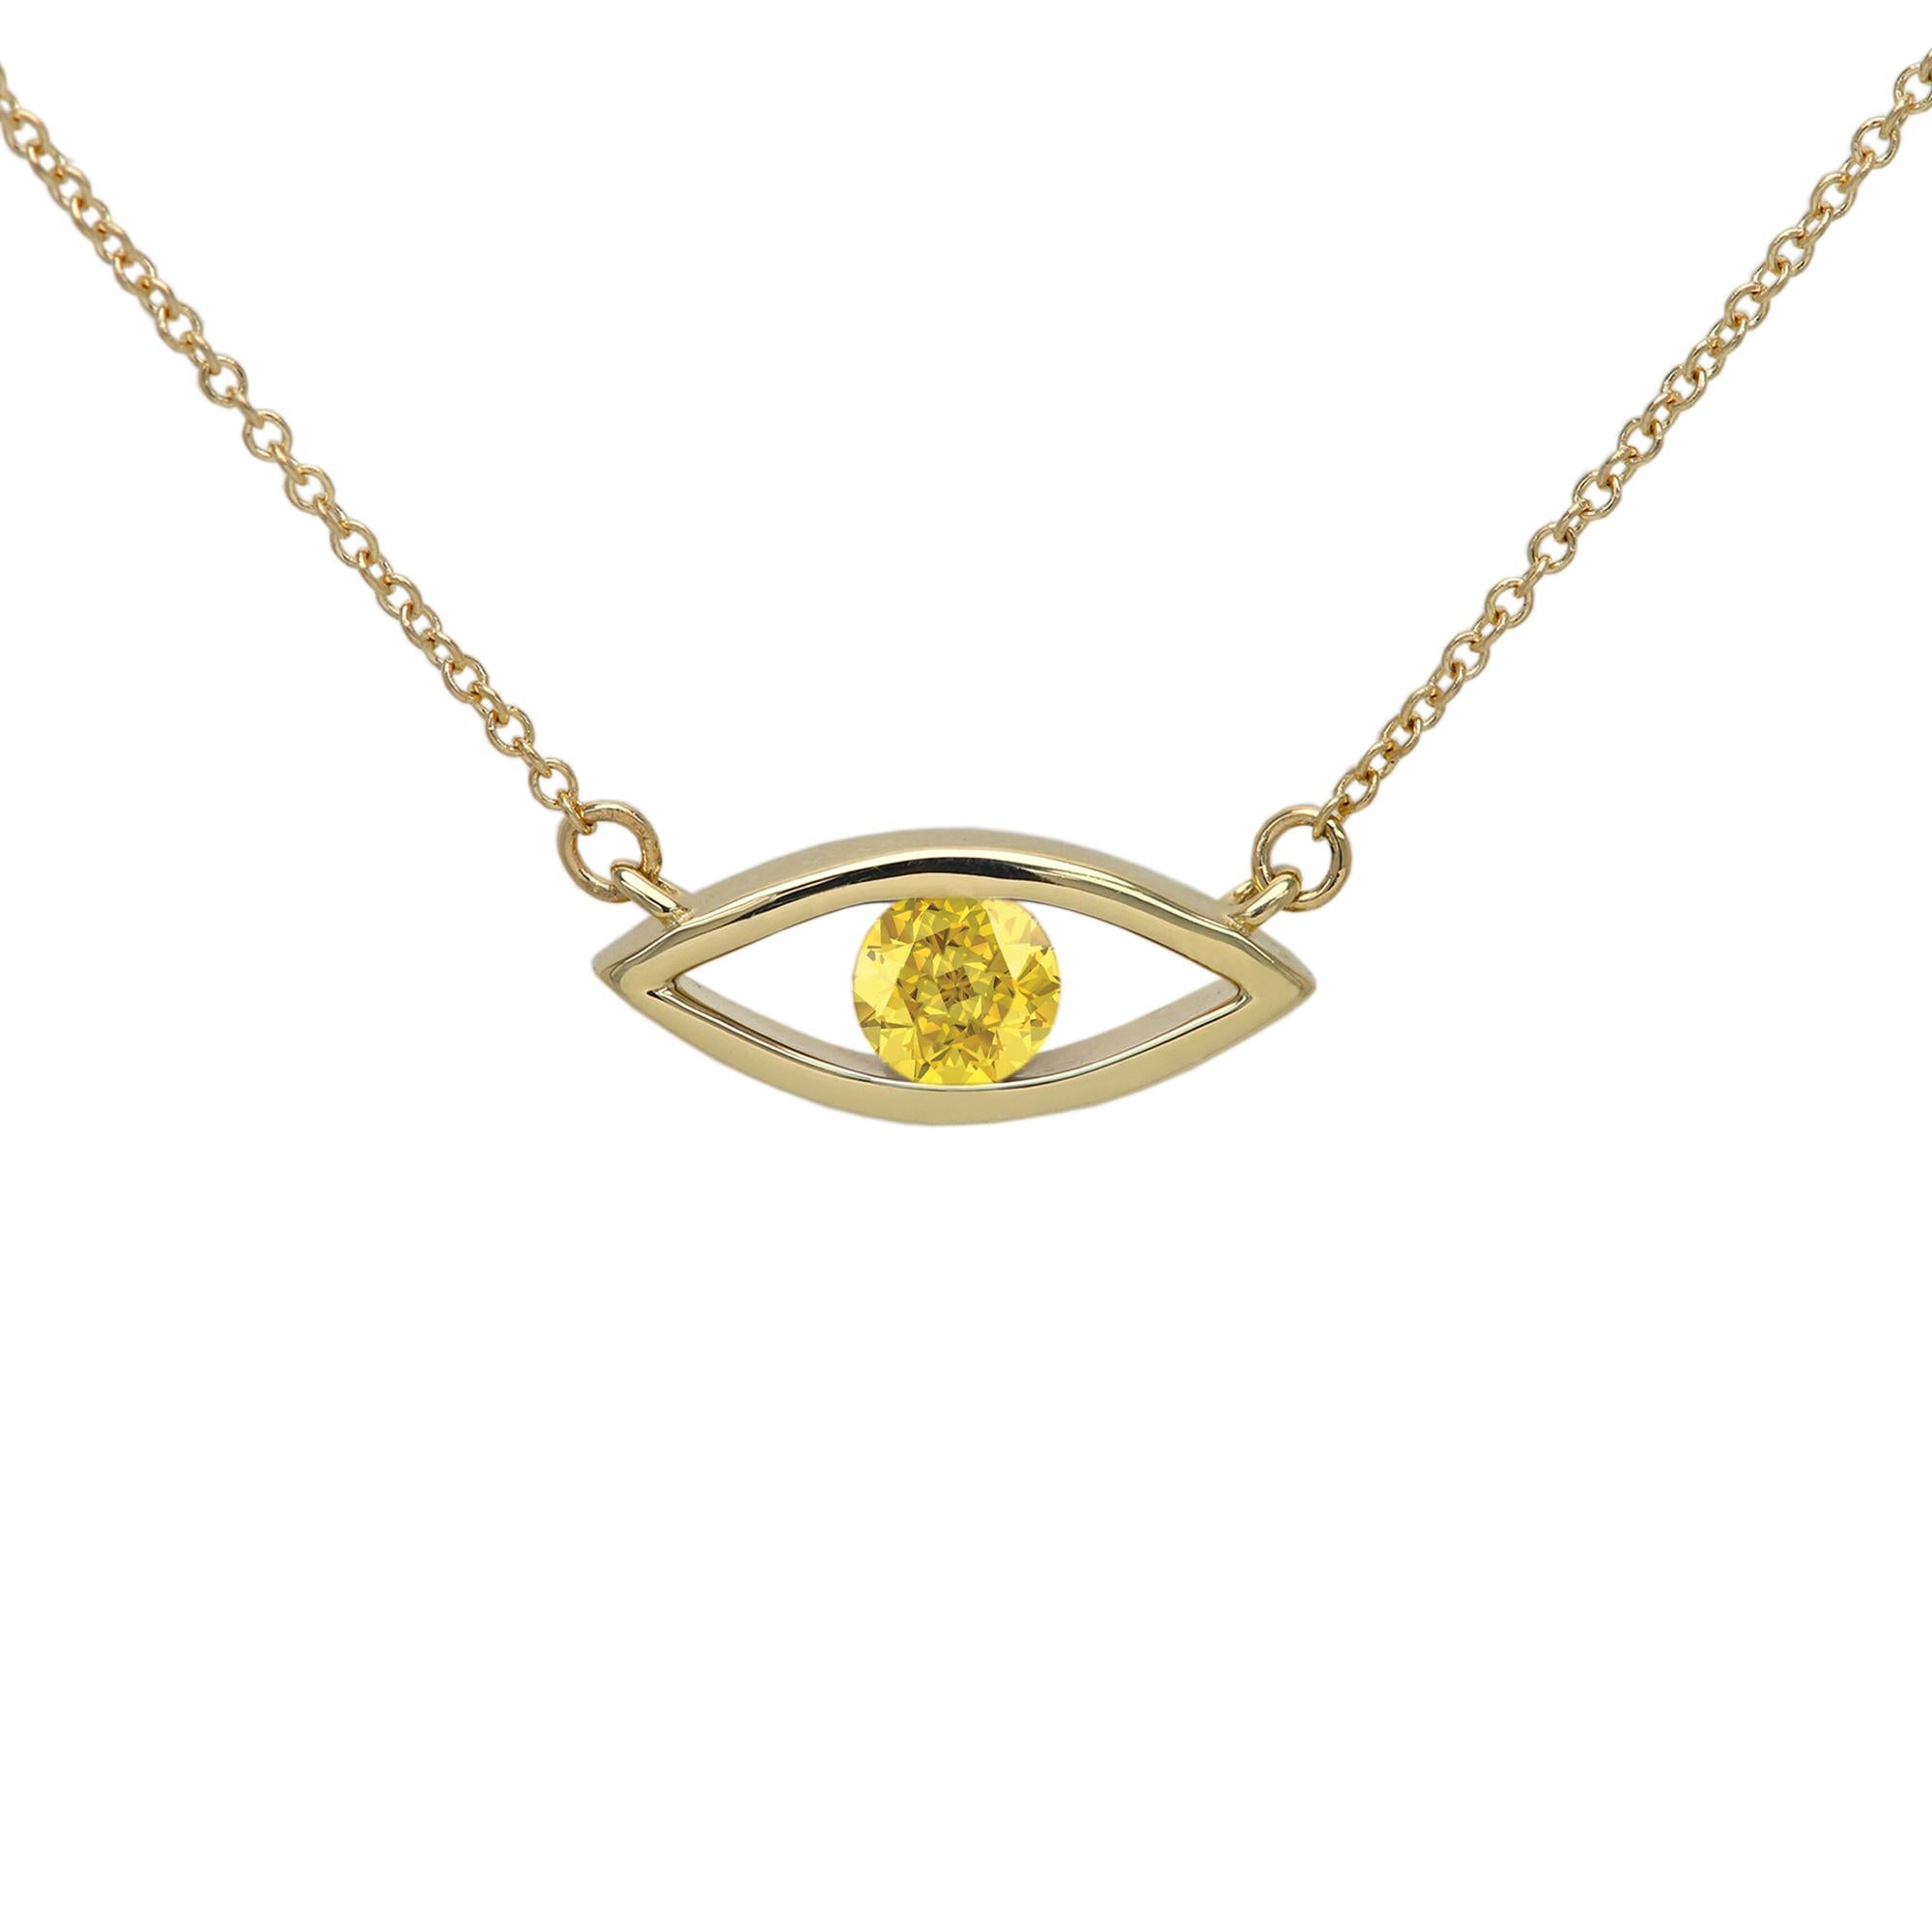 New, Very Elegant & Lovely Evil Eye Birthstone Necklace Solid 14k Yellow Gold with Natural Yellow Sapphire gemstone 
Set in Yellow Gold Evil Eye - Good Luck & protection Necklace
Classic Cable Chain and Lobster Lock - all 14k, 
Chain Length - as